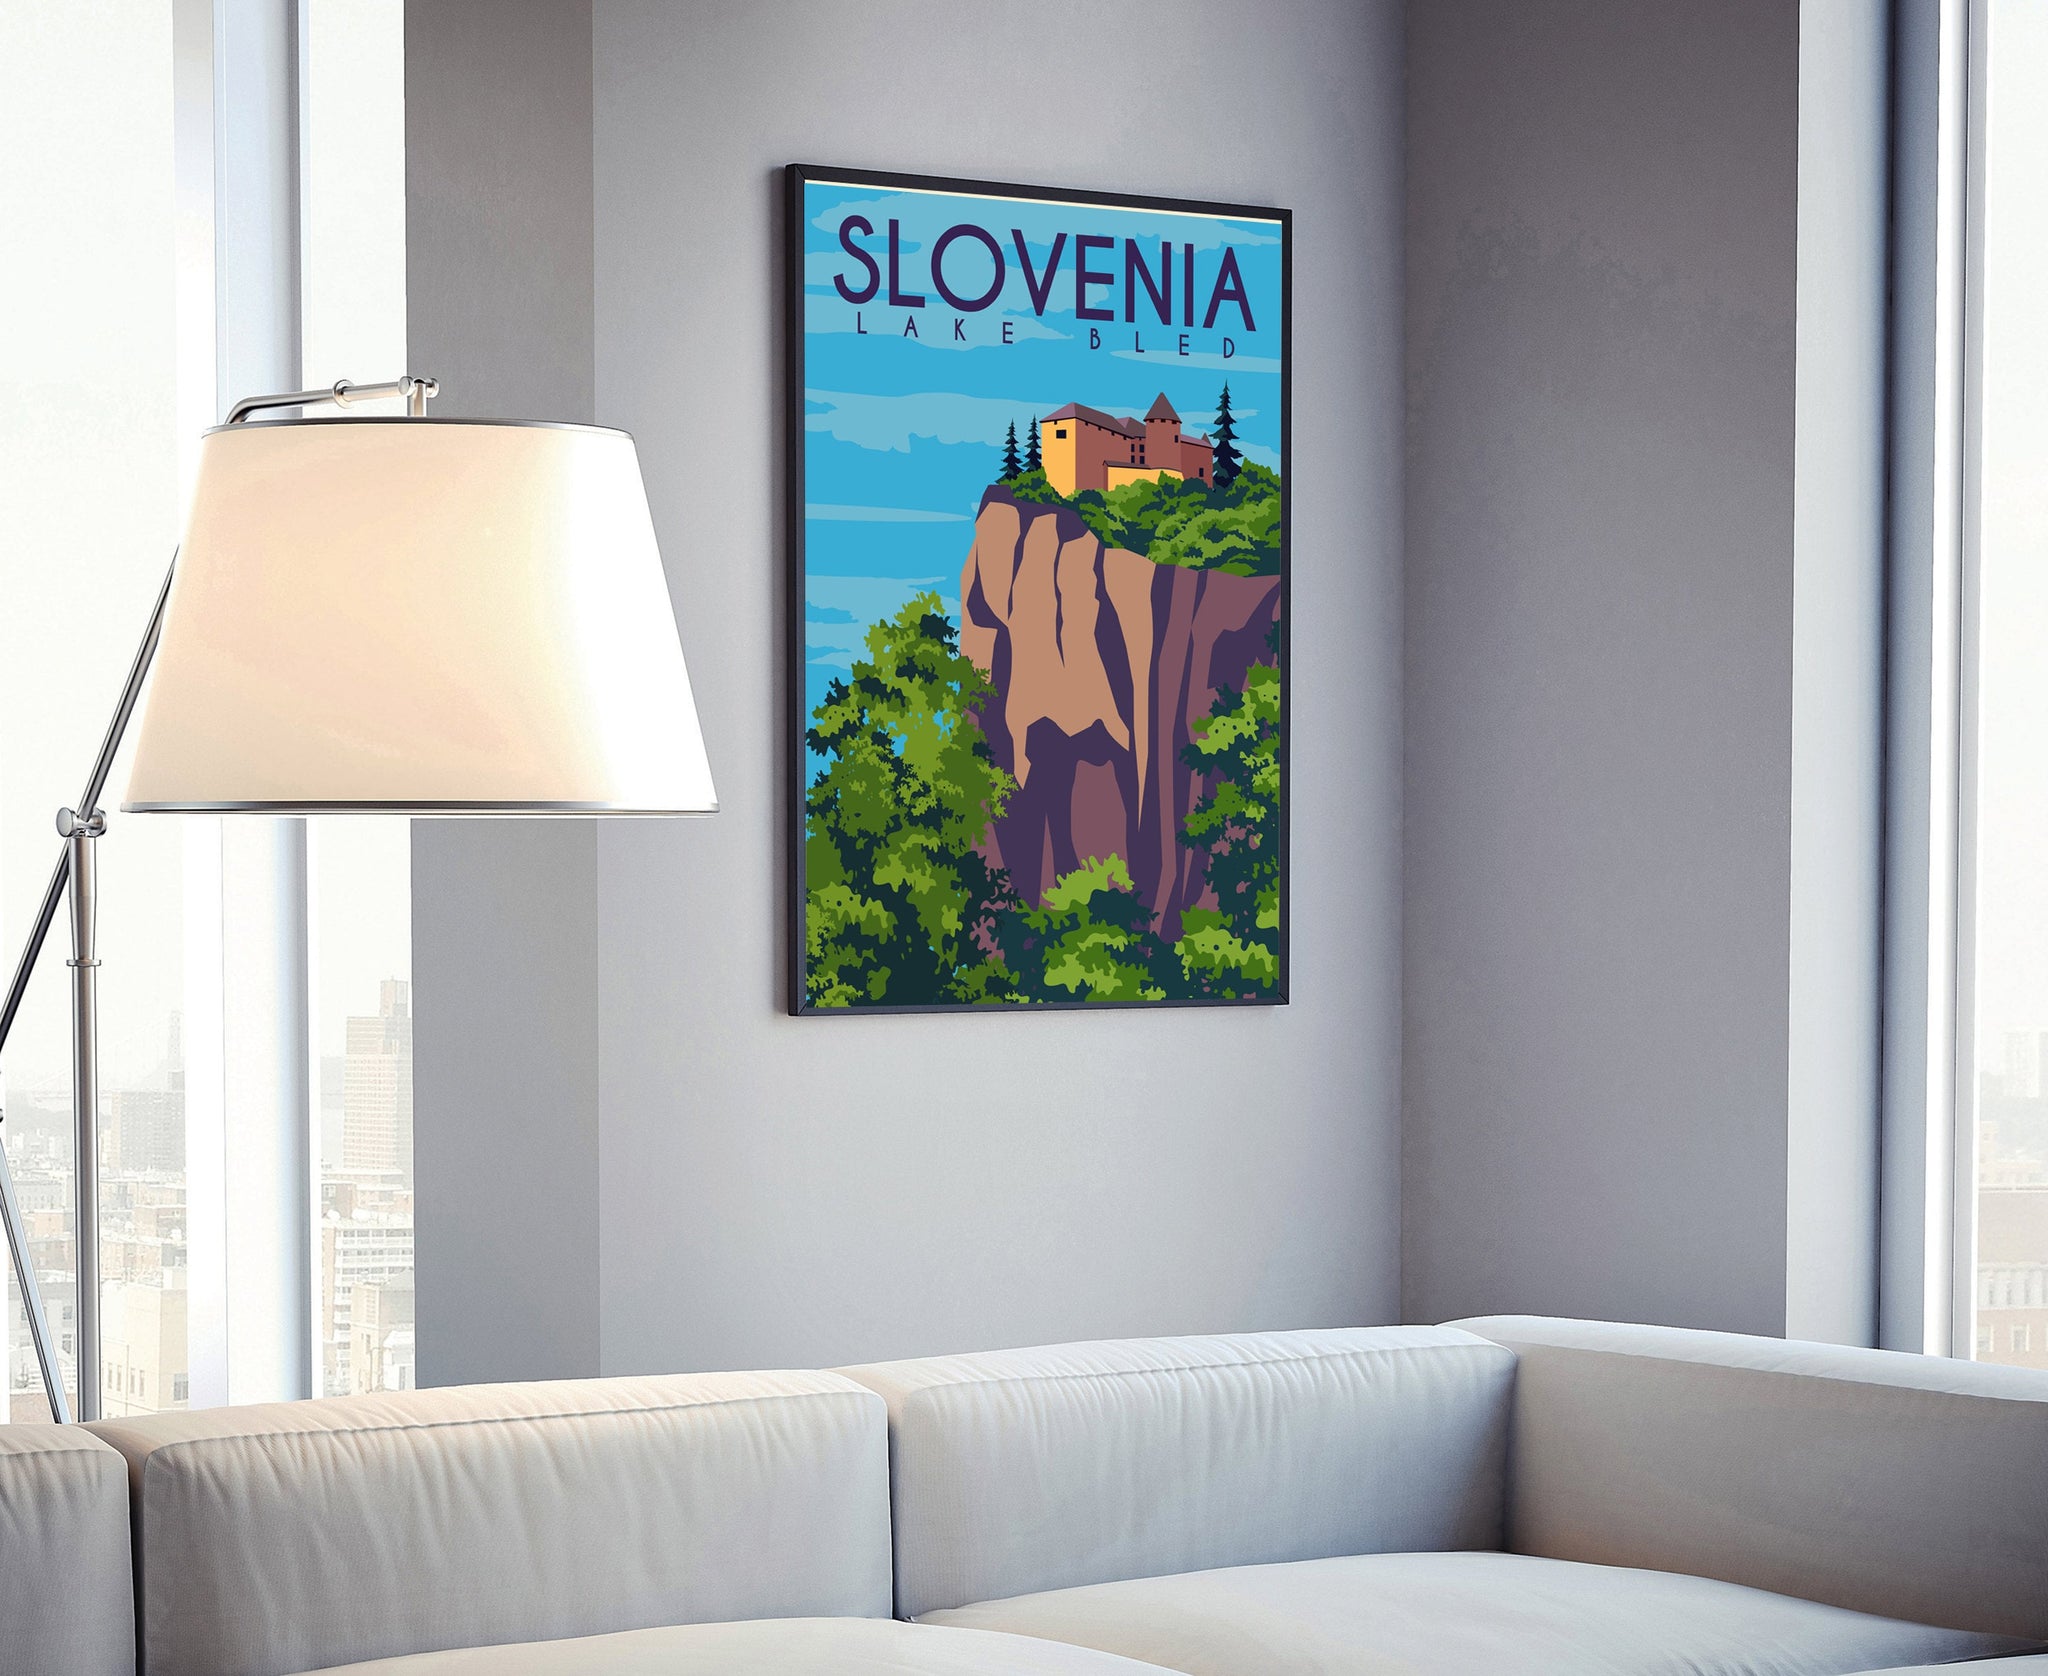 SLOVENIA travel poster, Slovenia cityscape and landmark poster wall art, Home wall art, Office wall decoration, Housewarming poster gift,